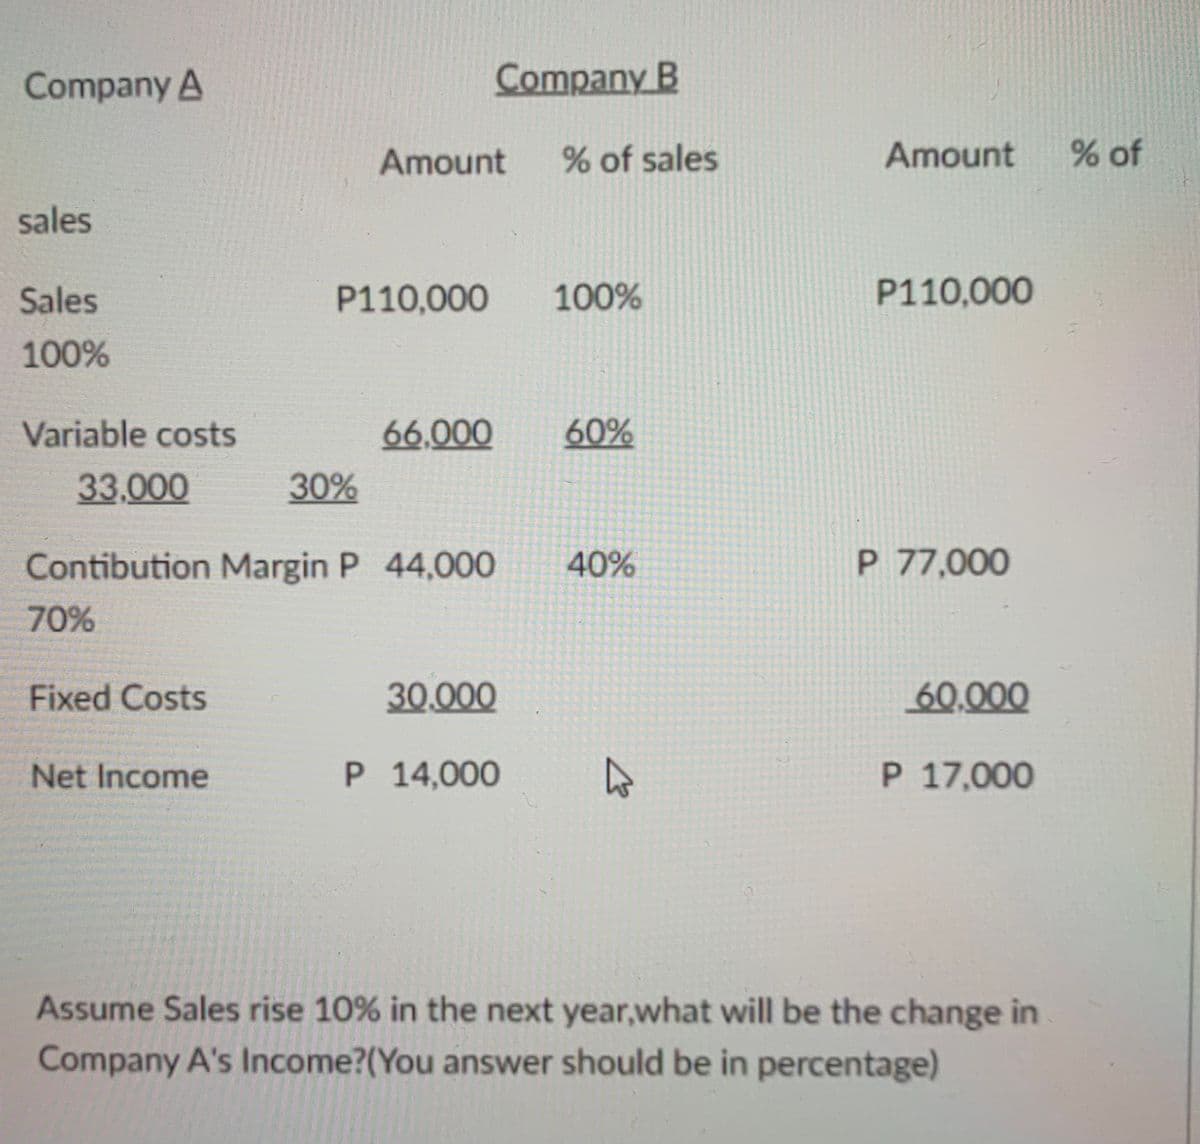 Company A
sales
Sales
100%
Variable costs
33,000
Fixed Costs
Net Income
Company B
Amount % of sales
P110,000
30%
Contibution Margin P 44,000
70%
66.000
30.000
P 14,000
100%
60%
40%
4
Amount
P110,000
P 77,000
60,000
P 17,000
Assume Sales rise 10% in the next year,what will be the change in
Company A's Income?(You answer should be in percentage)
% of